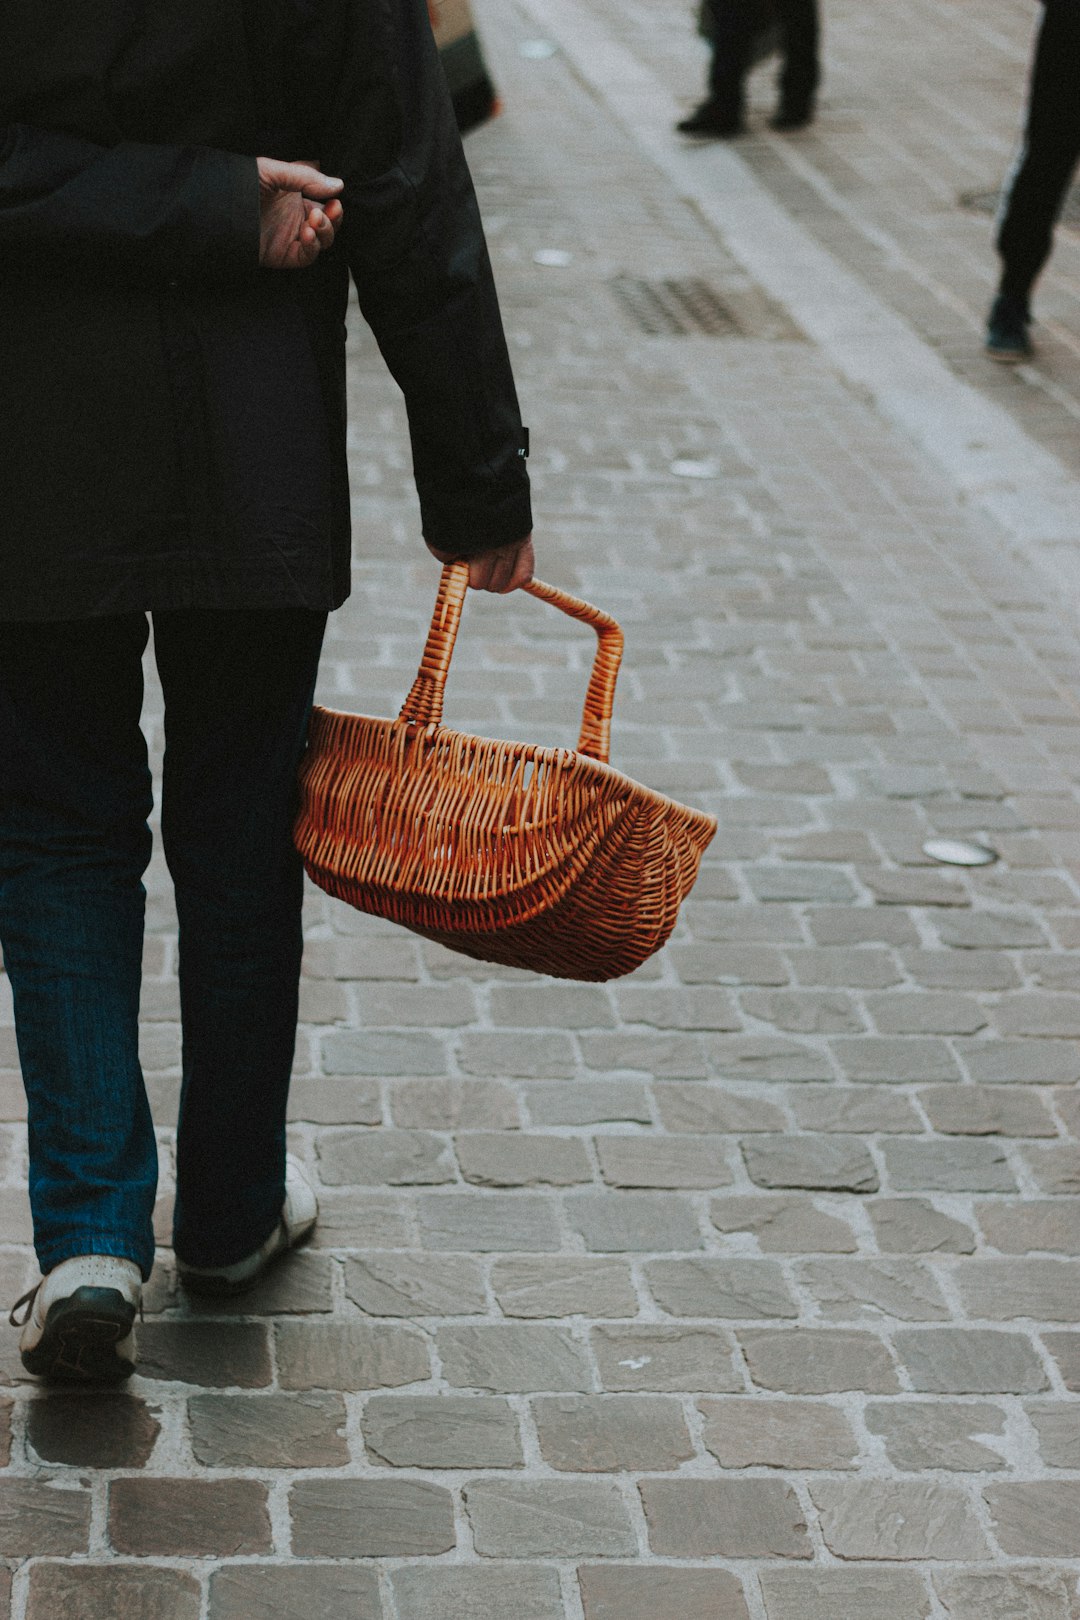 person in black jacket and blue denim jeans holding brown woven basket